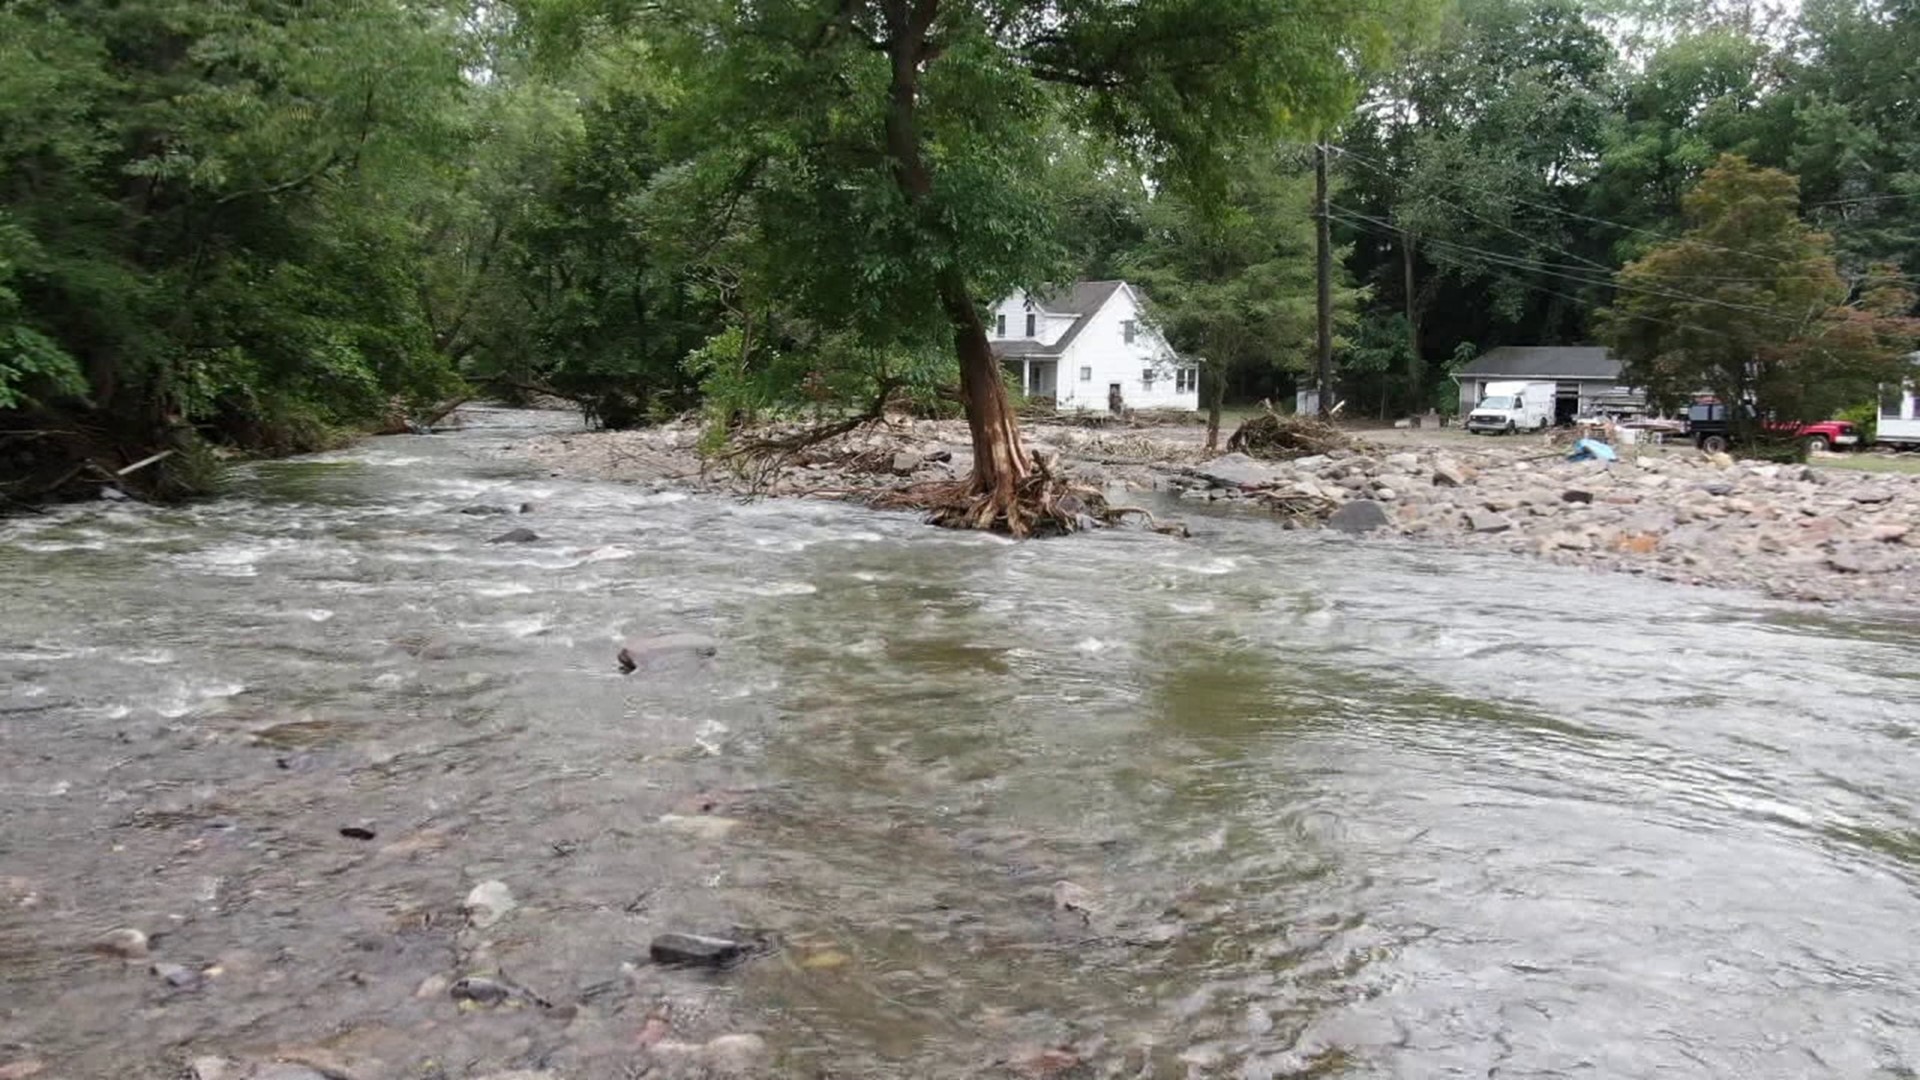 Flash floods in September caused millions of dollars worth of damage in Northeastern Pennsylvania. Now, lawmakers are offering low-interest loans for flood victims.